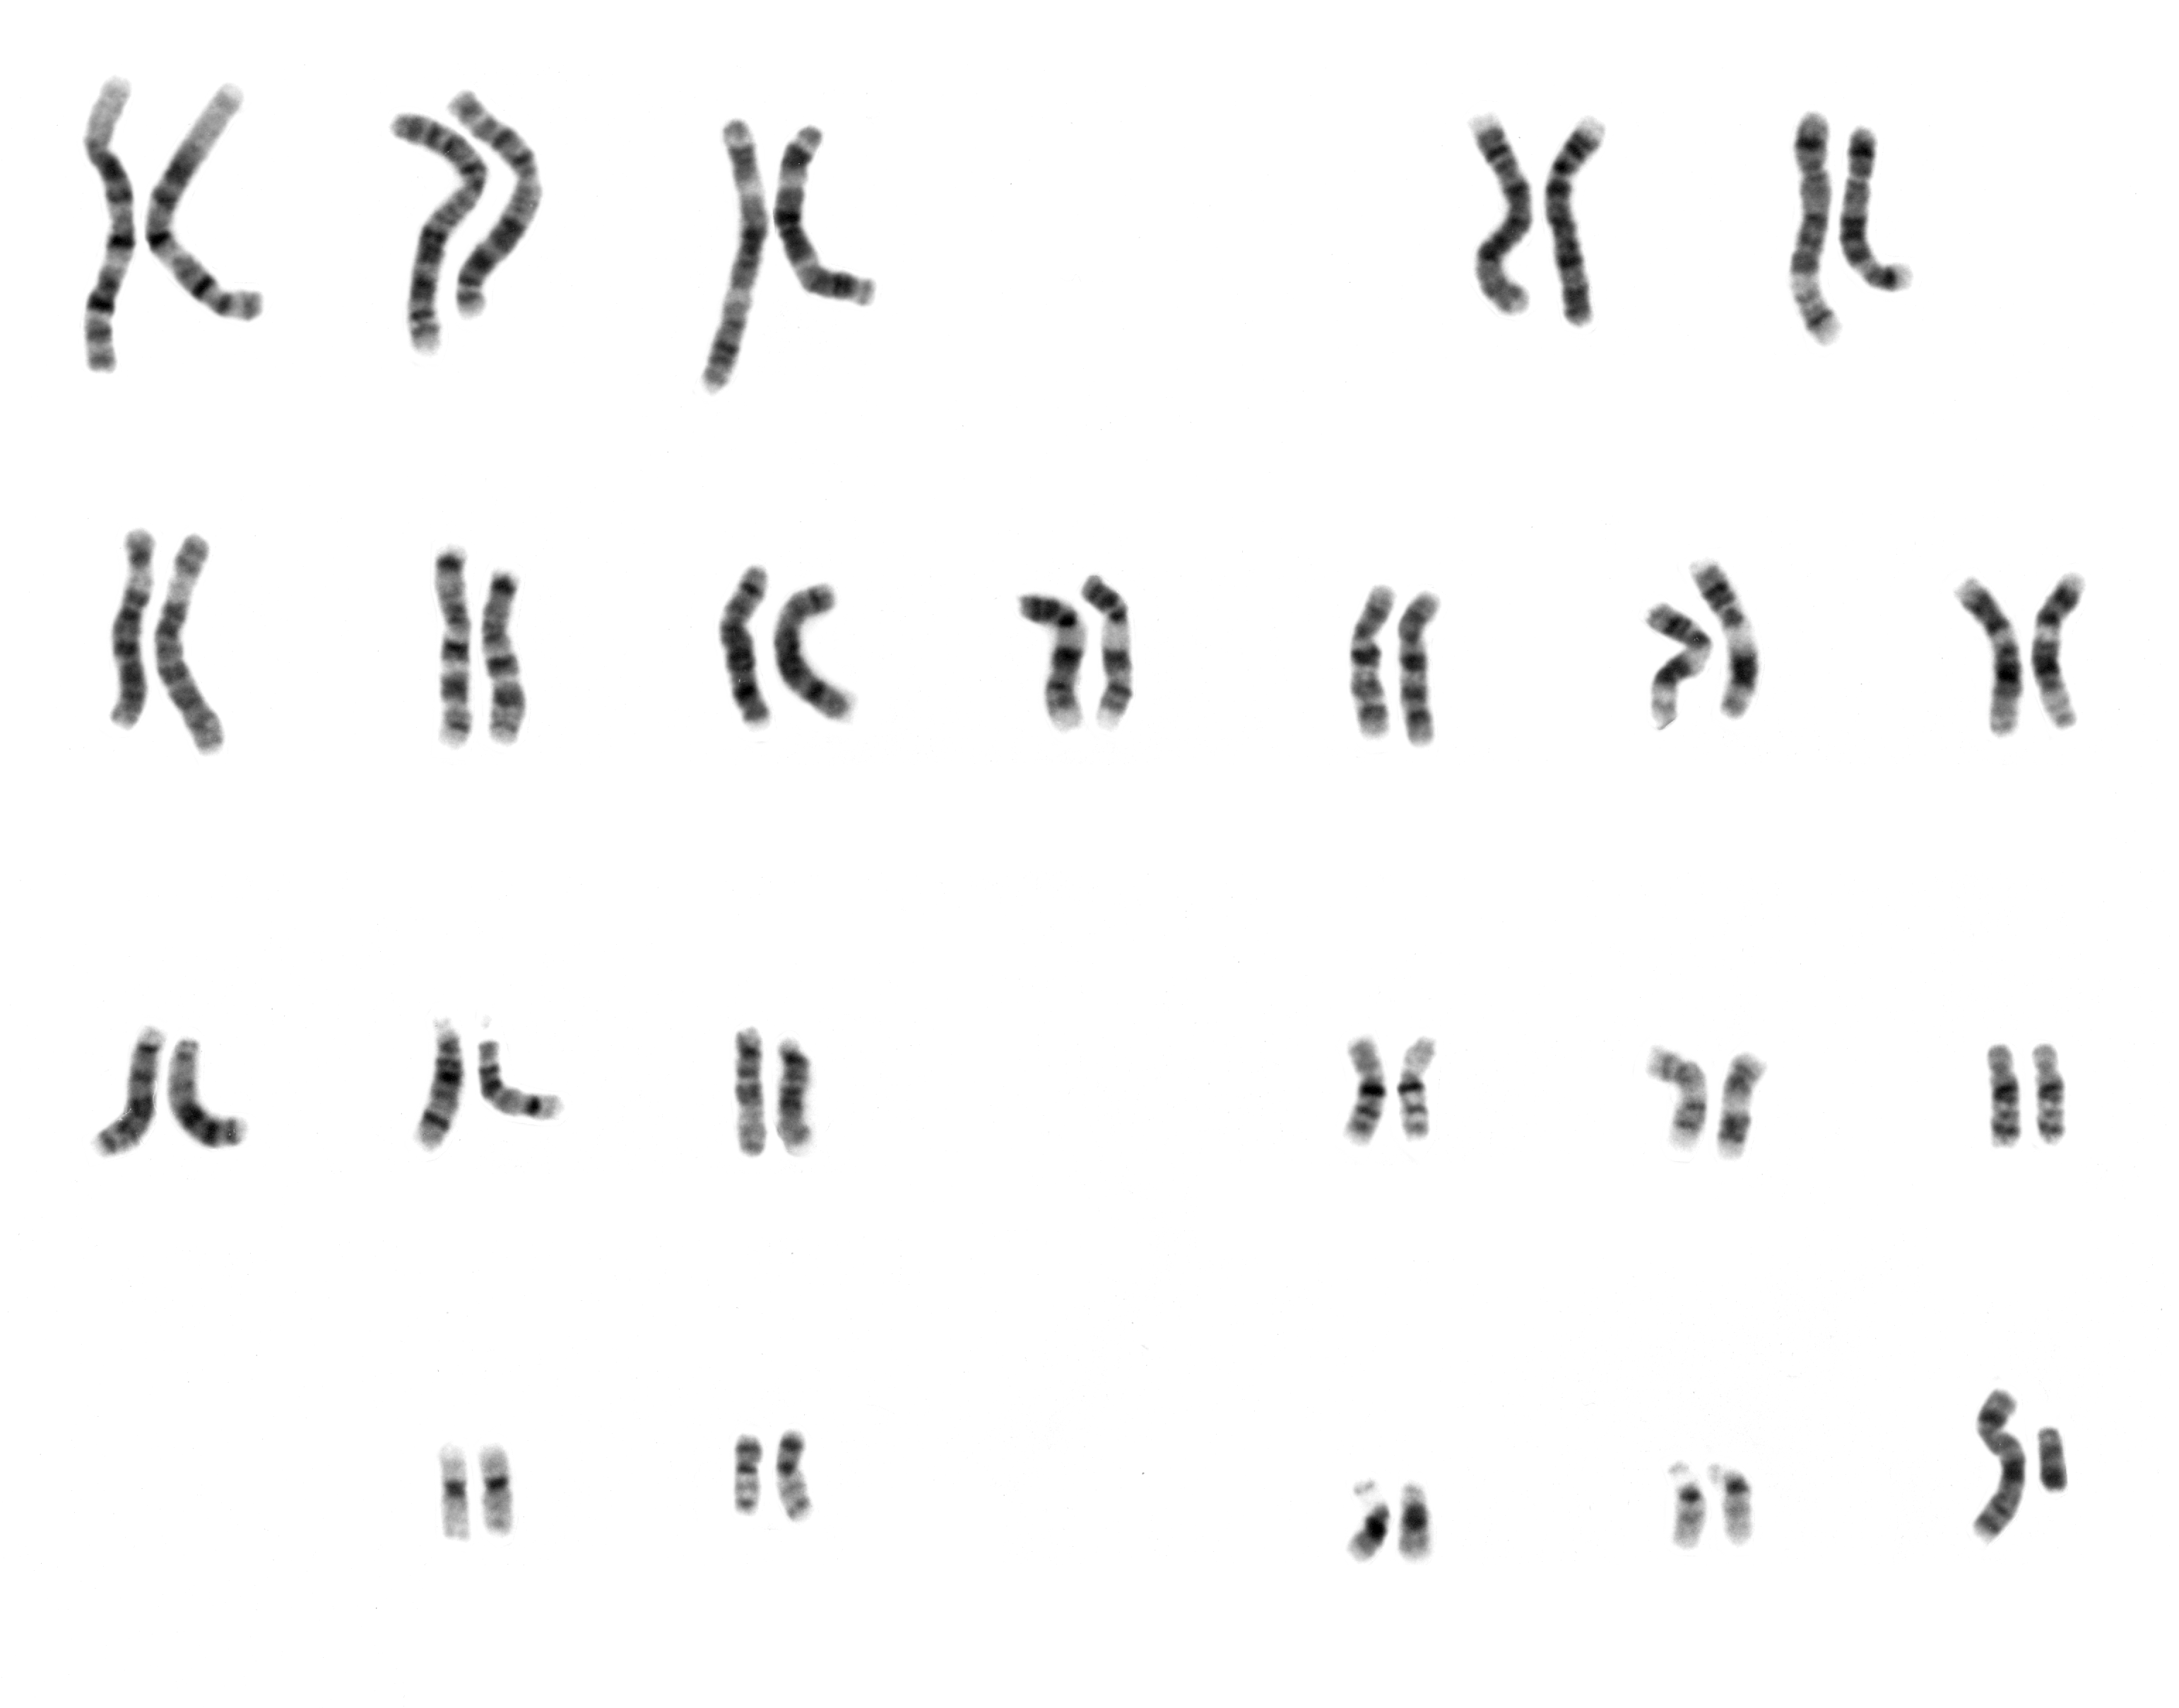 The karyotype of a normal human male consisting of 22 pairs of autosomes and 2 sex chromosomes (one x and one y chromosome). The karyotype is the characteristic chromosome complement of a eukaryote species.